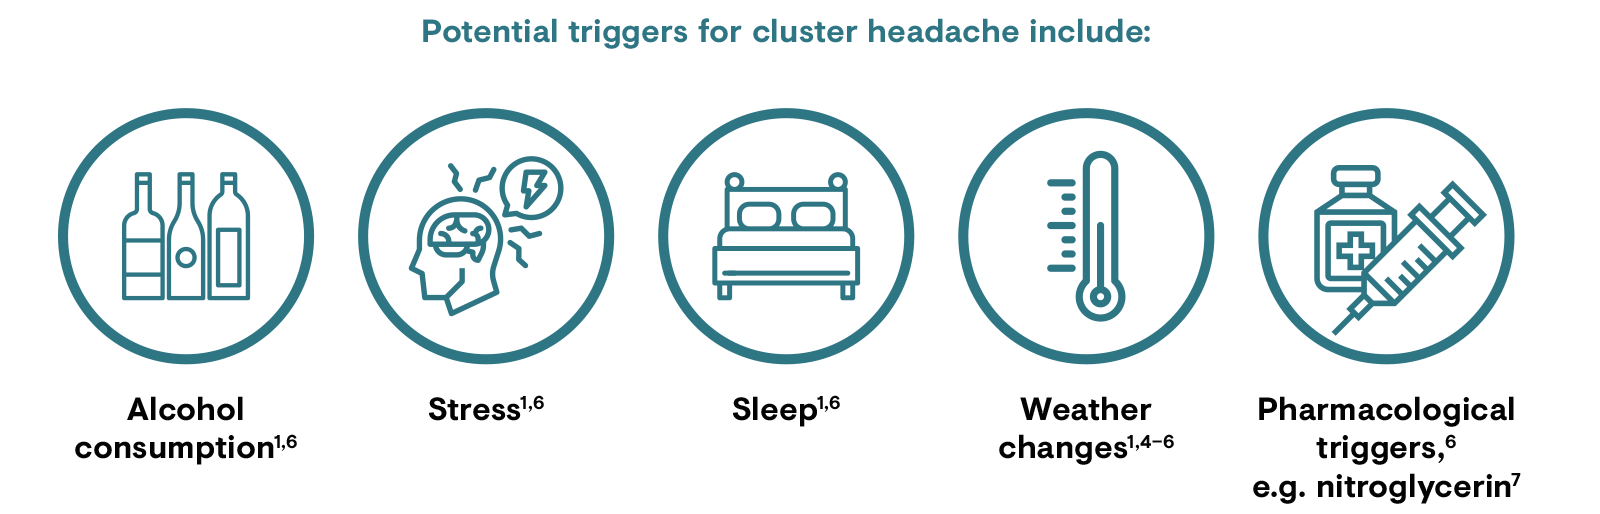 Potential triggers for cluster headache include alcohol, stress, sleep, weather changes and pharmacological triggers